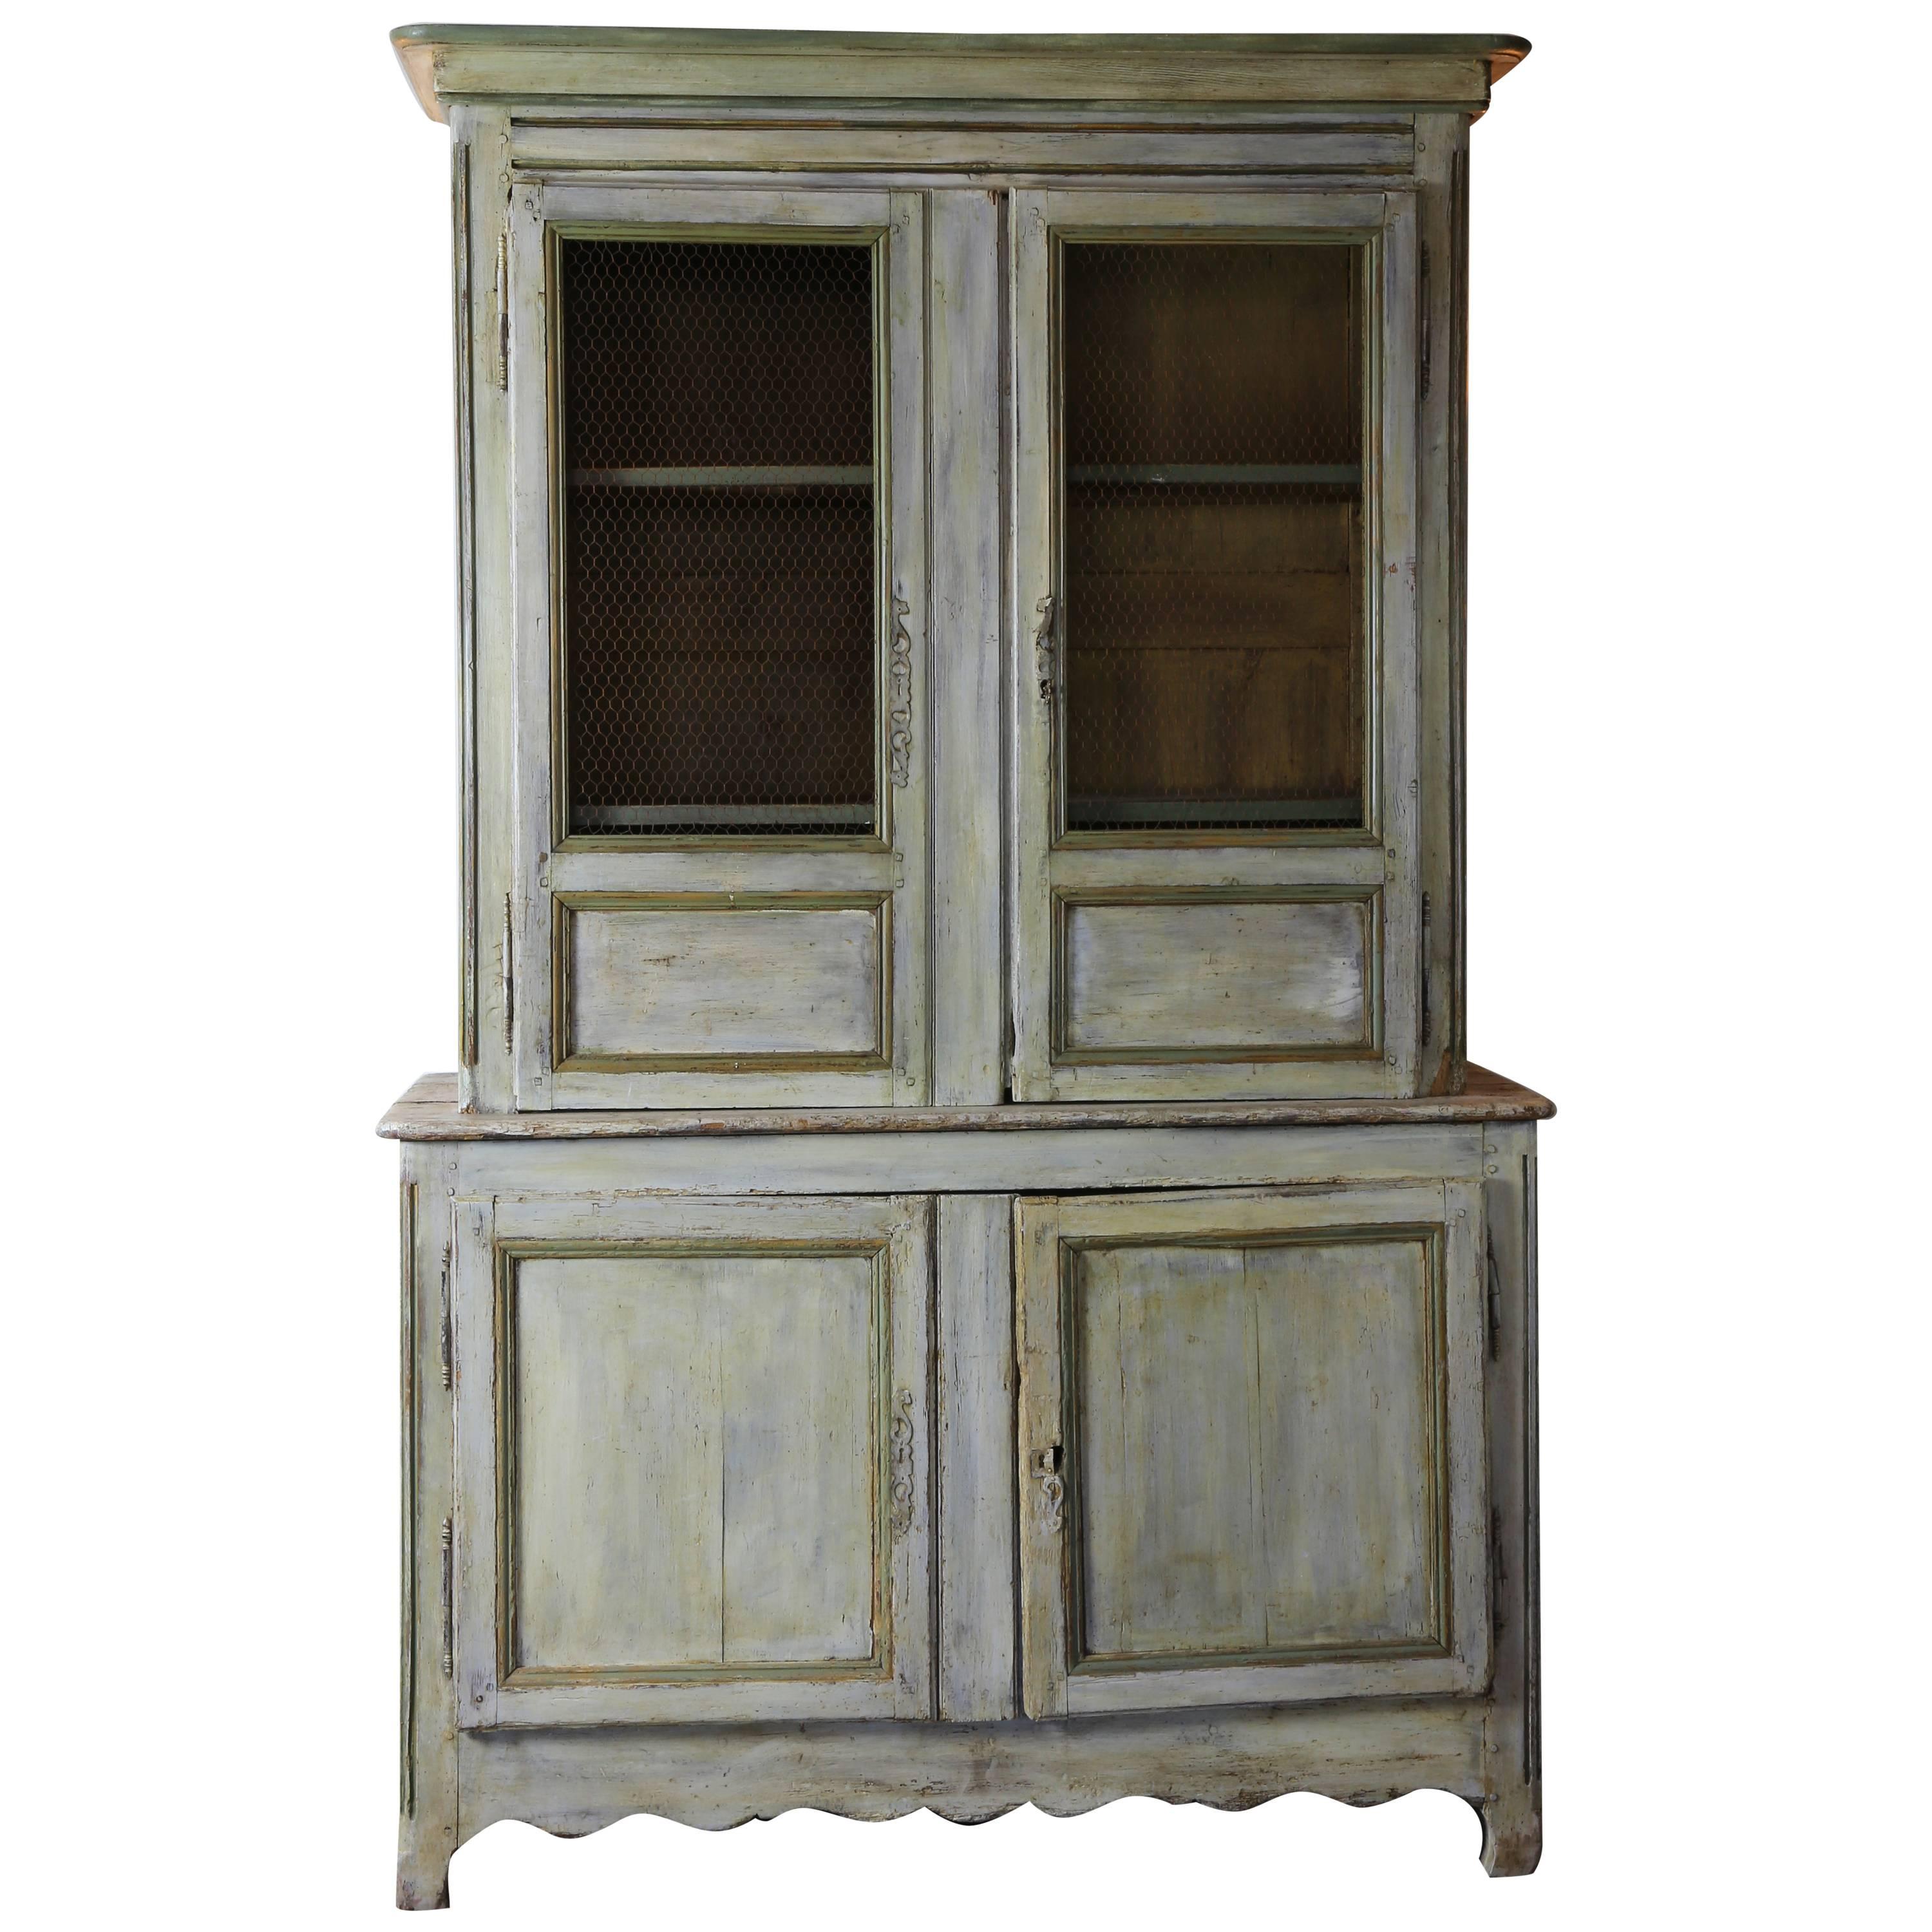 Early 19th Century Provençal Painted Wood Buffet à Deux Corps For Sale